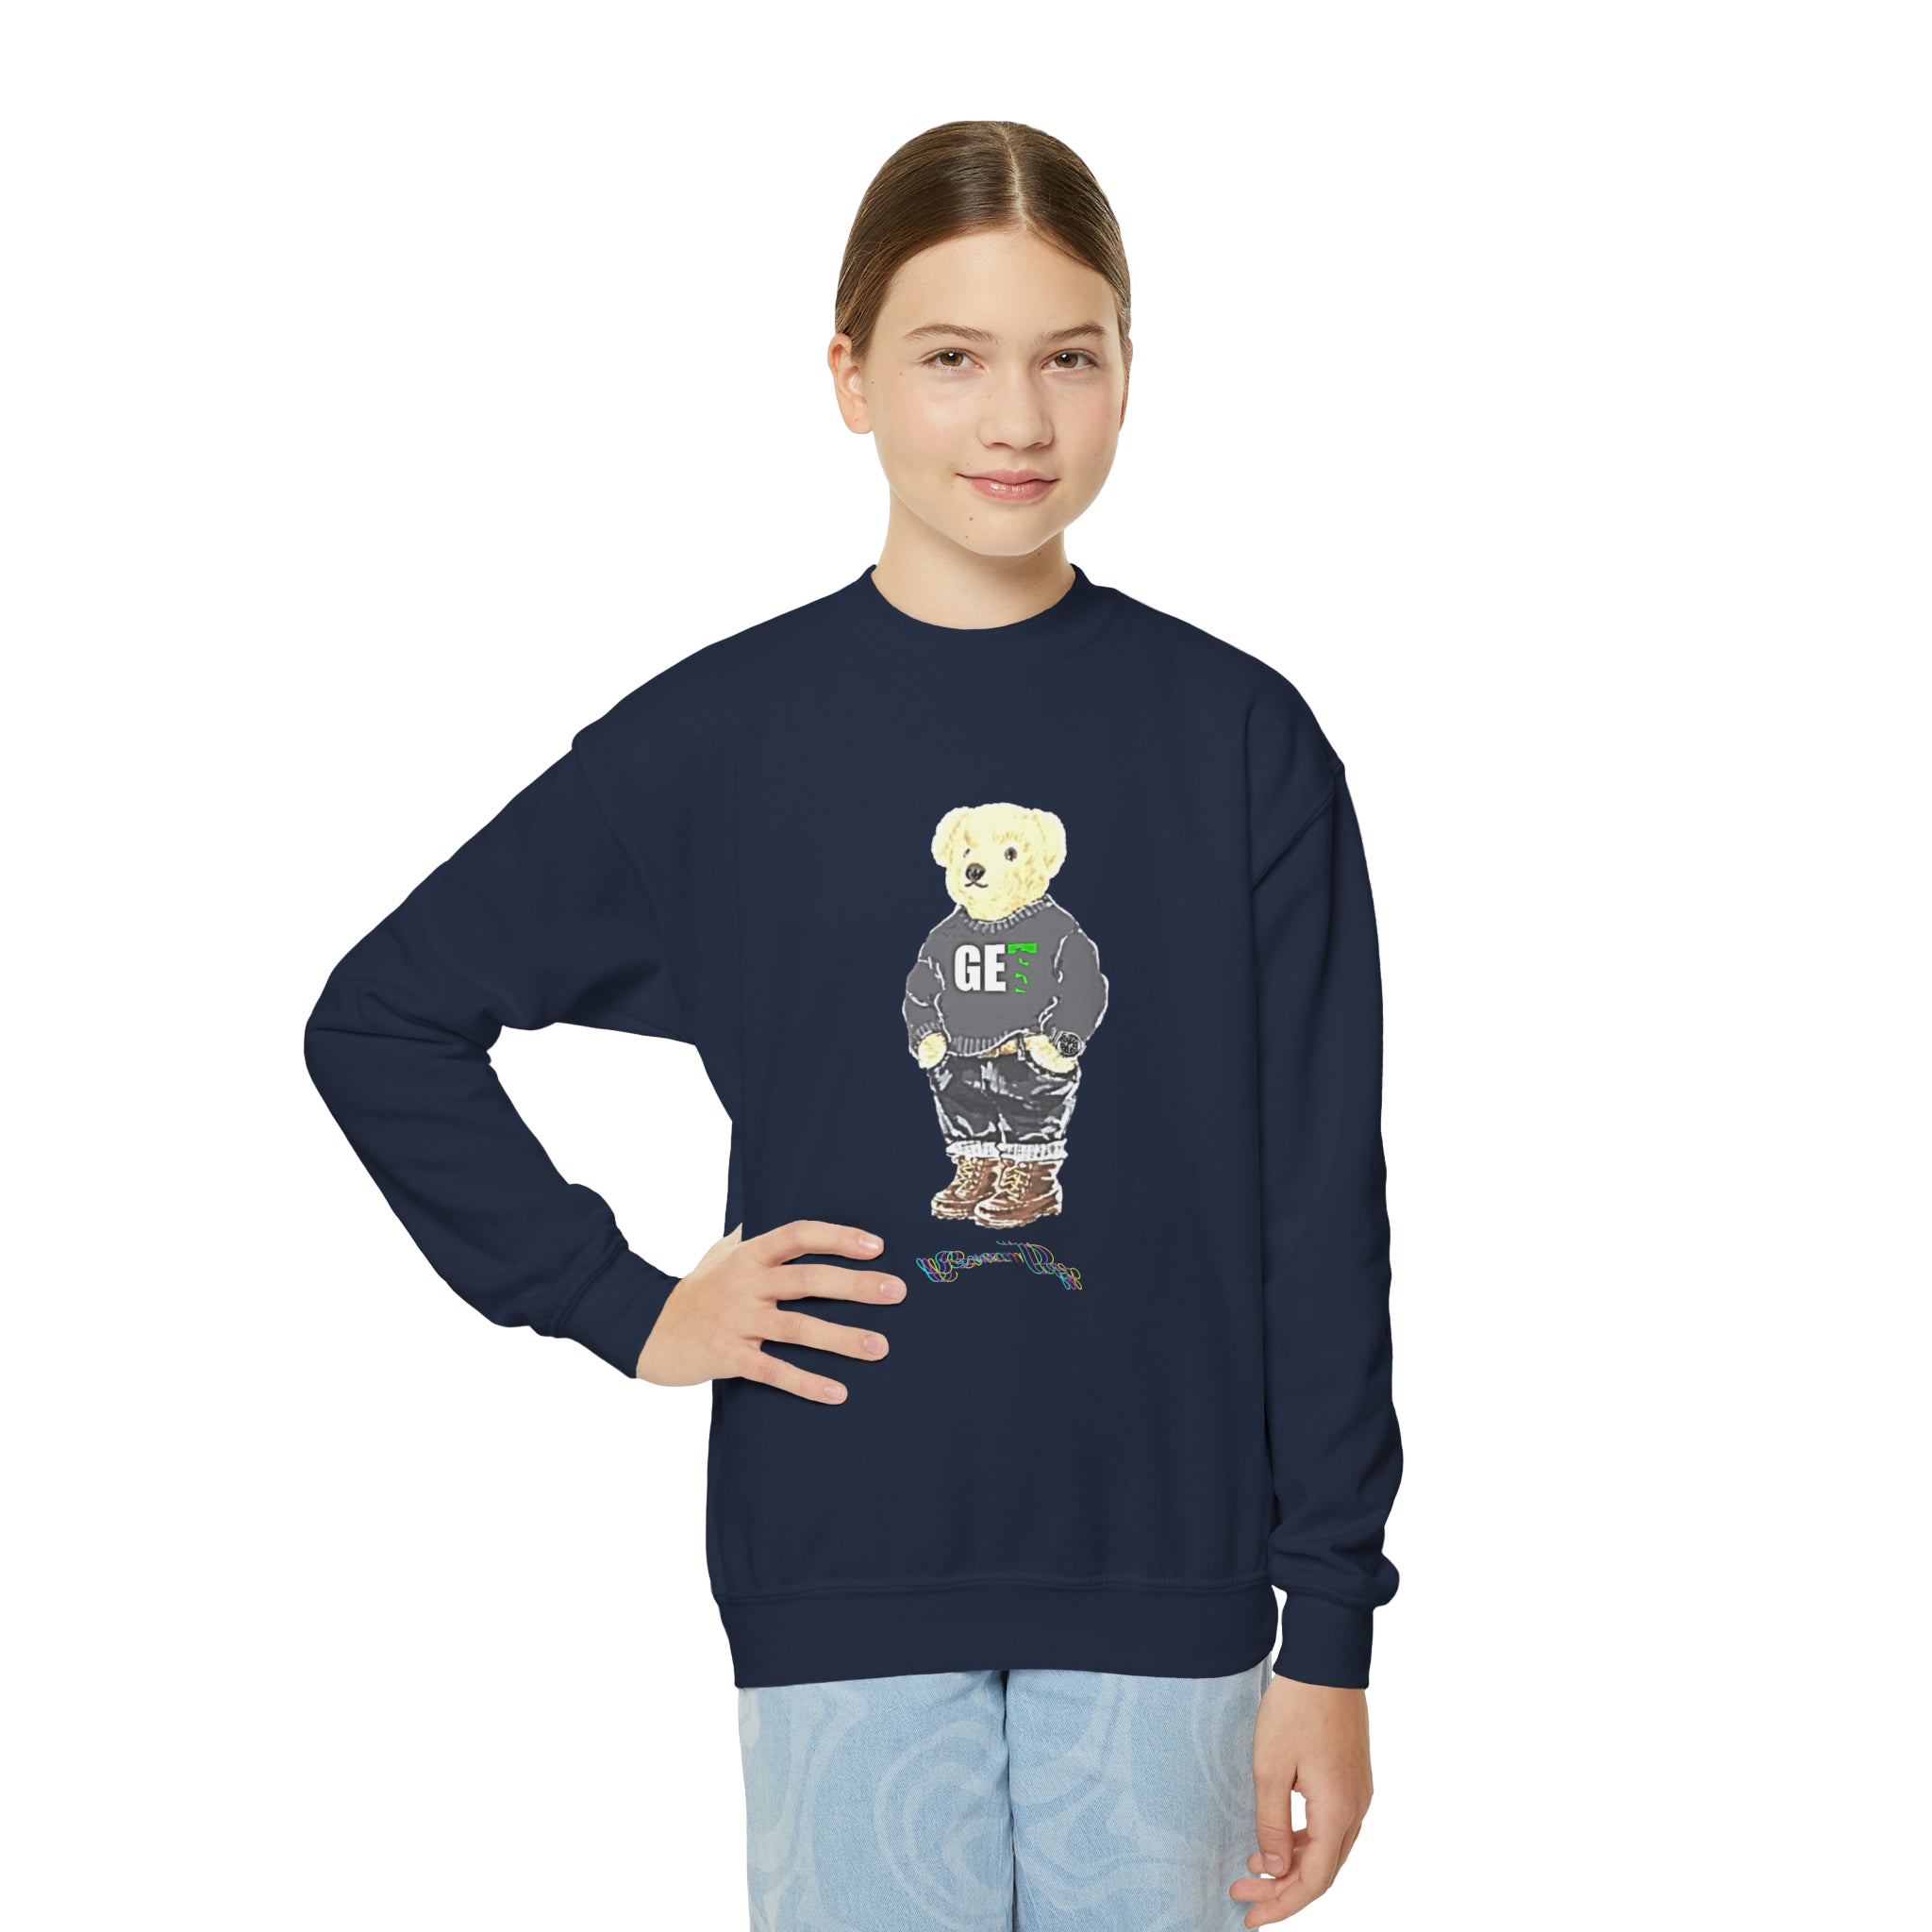 Grizzly Collab Youth Crewneck Sweatshirt